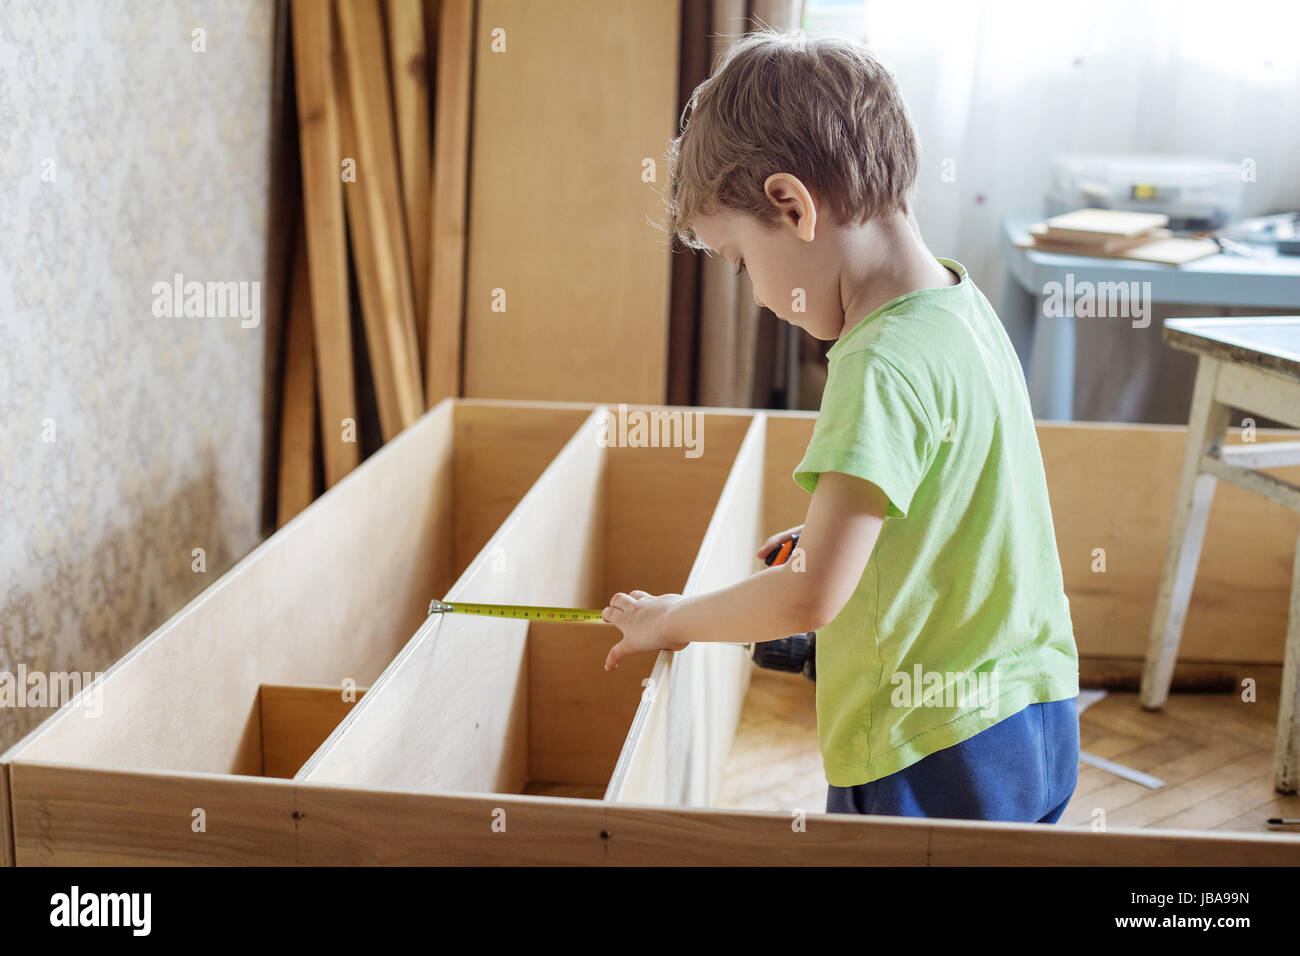 Young boy using reel to measure wooden shelf of bookcase or shelf unit Stock Photo